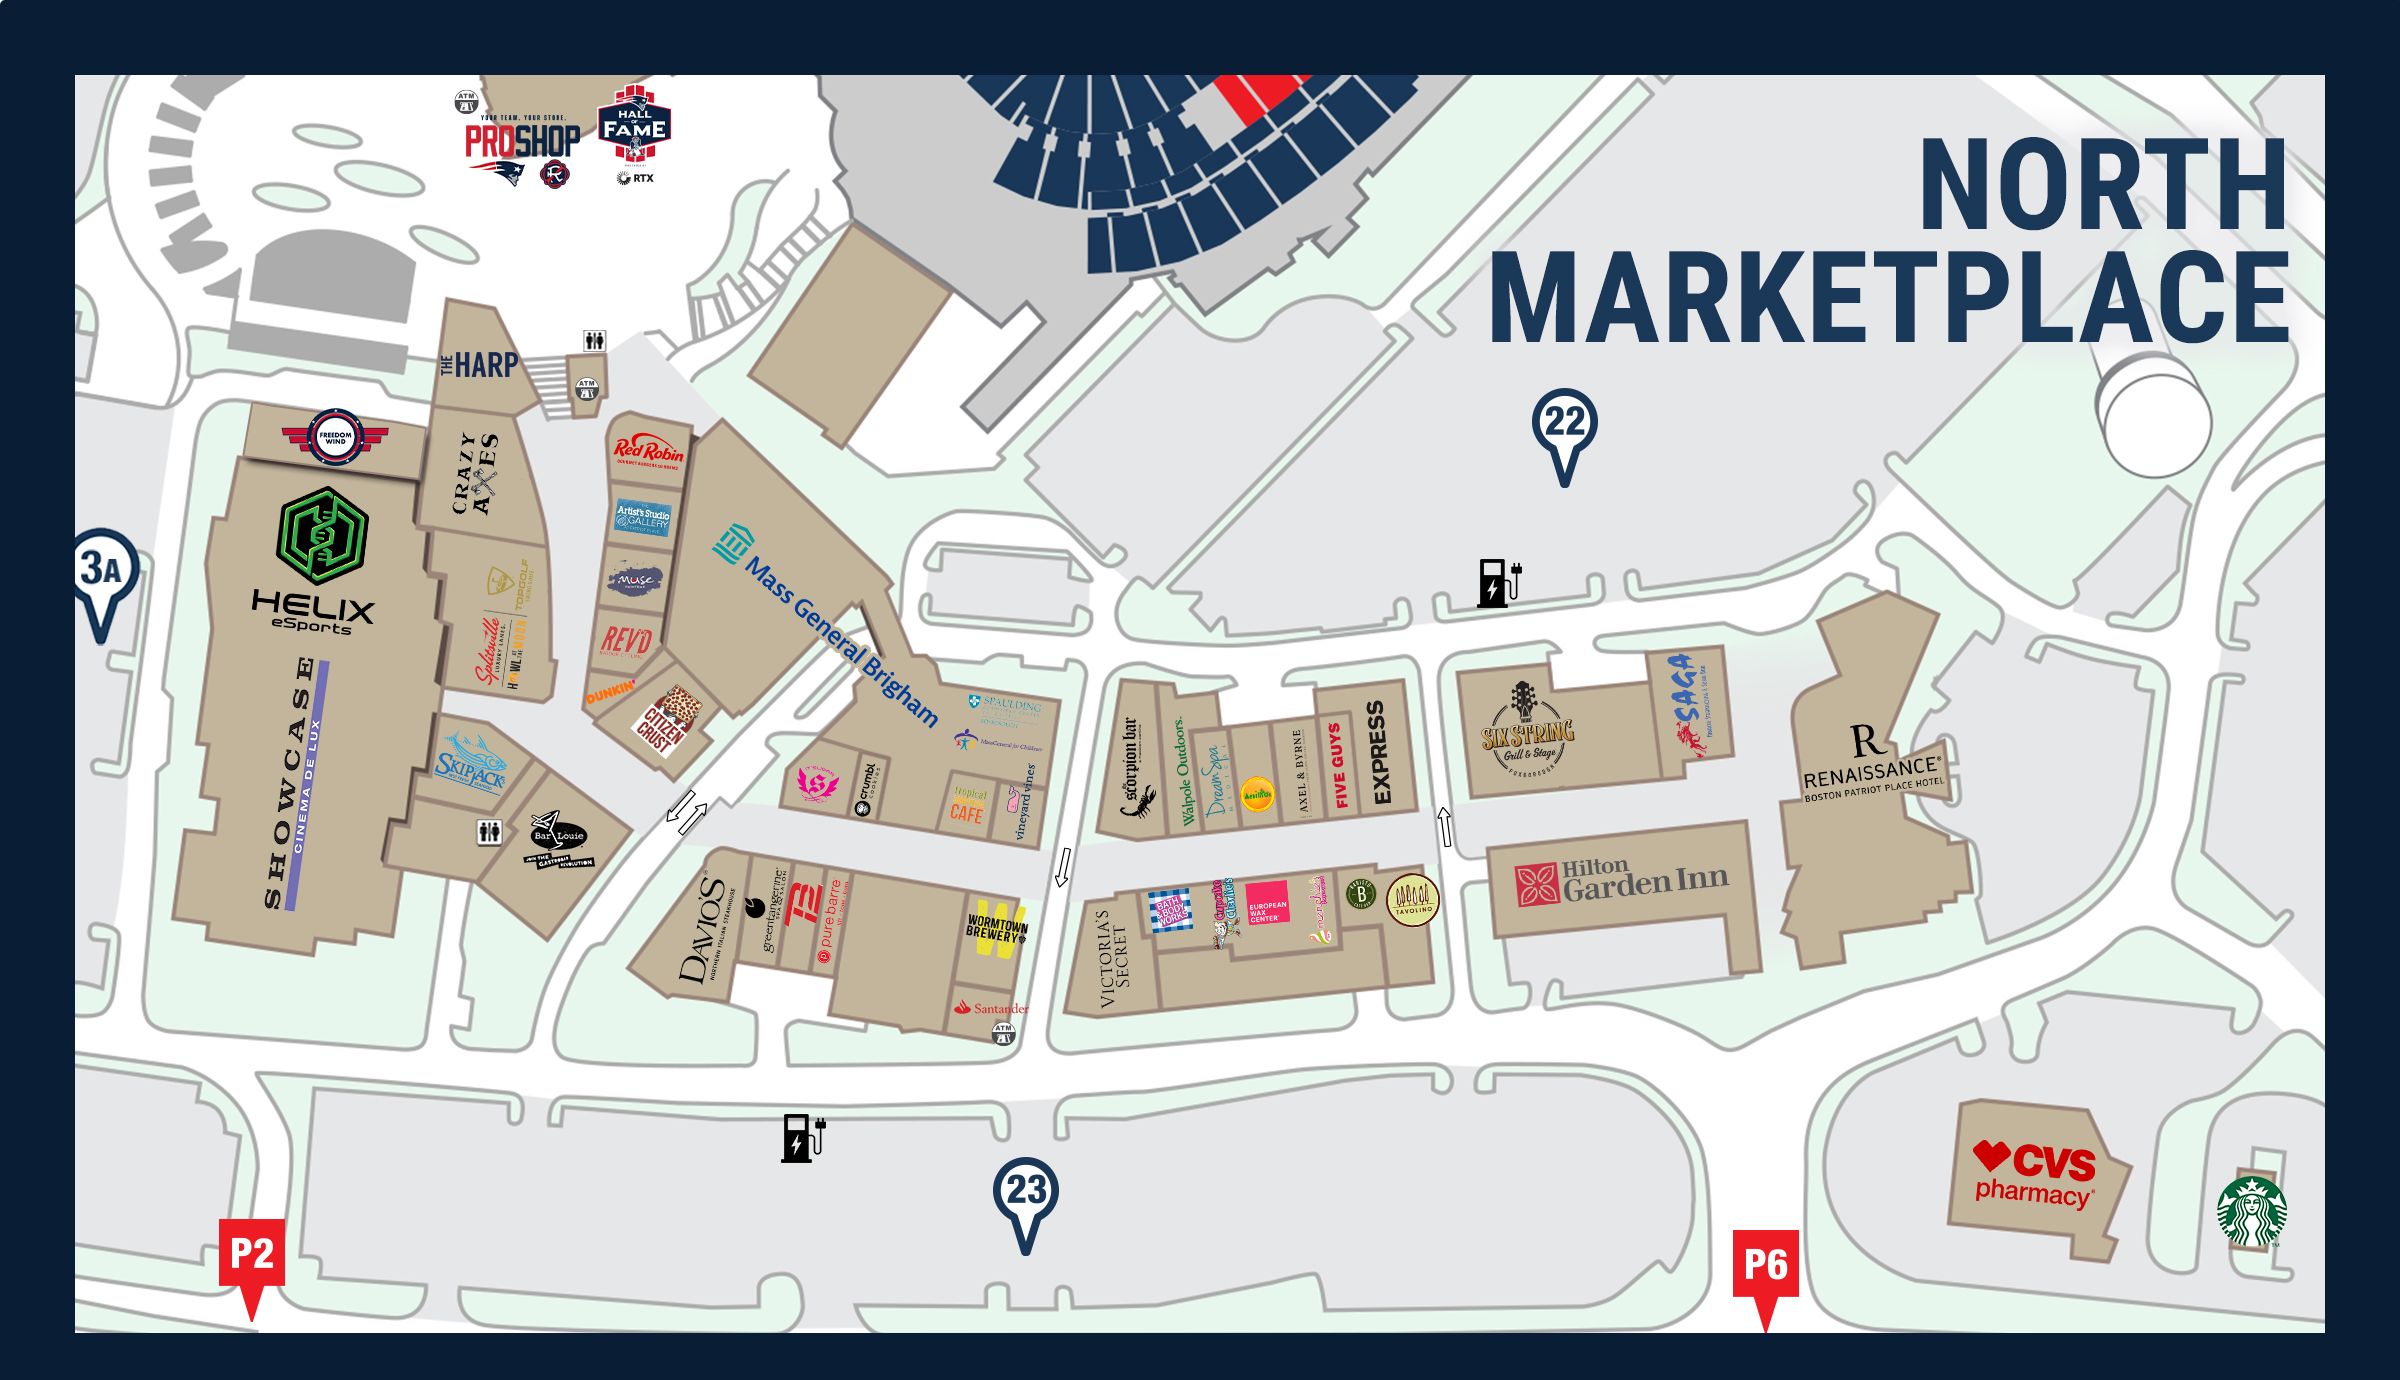 Patriot Place North Marketplace Map